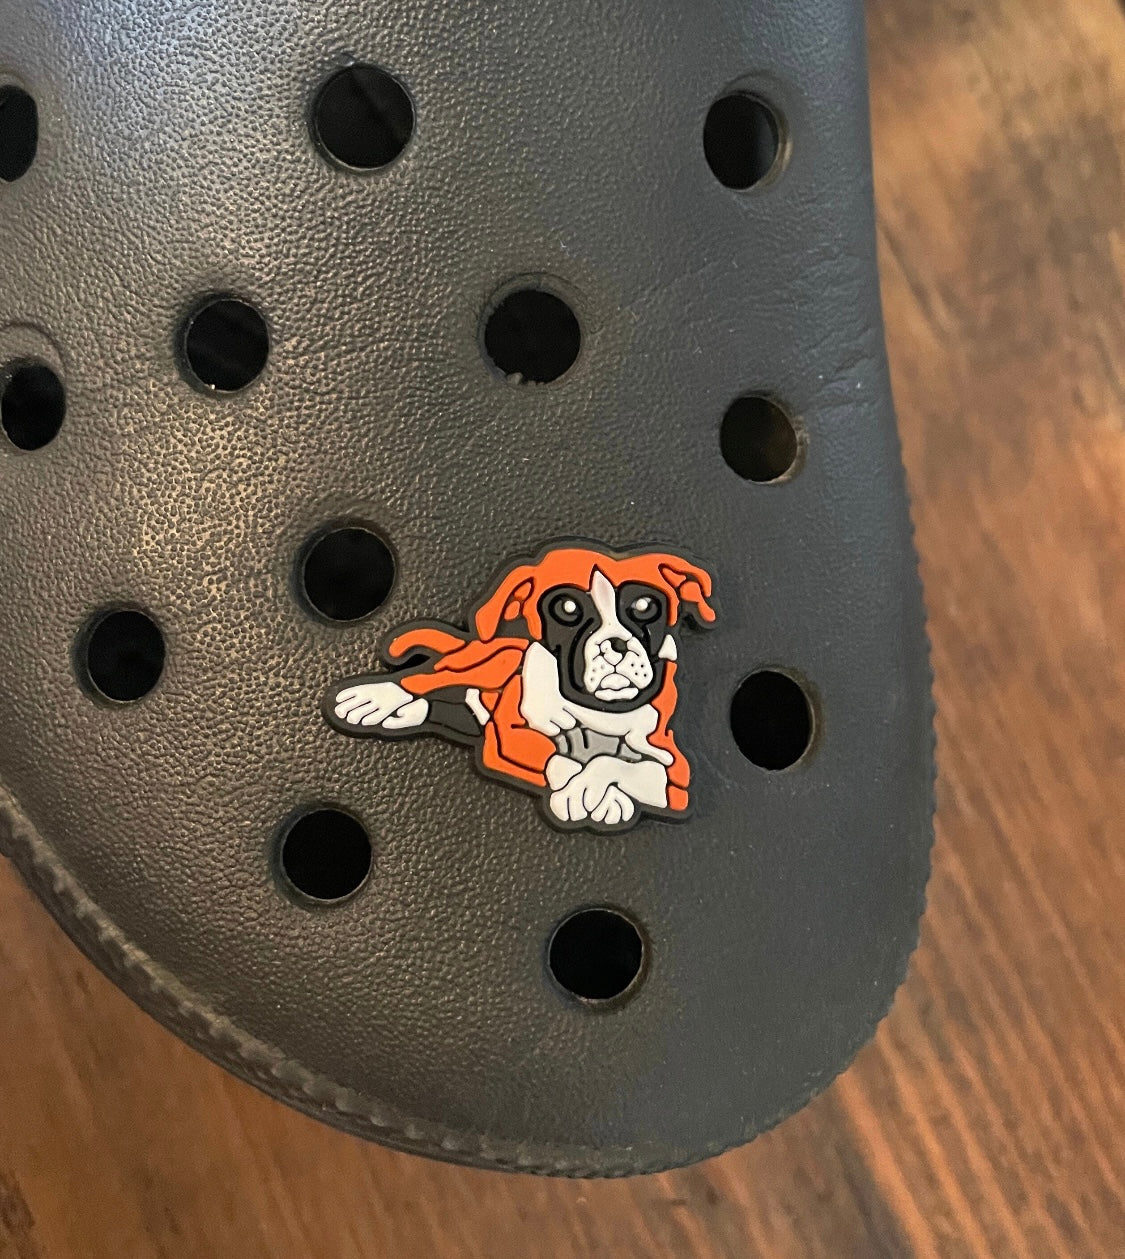 Laying down boxer dog on a croc shoe.